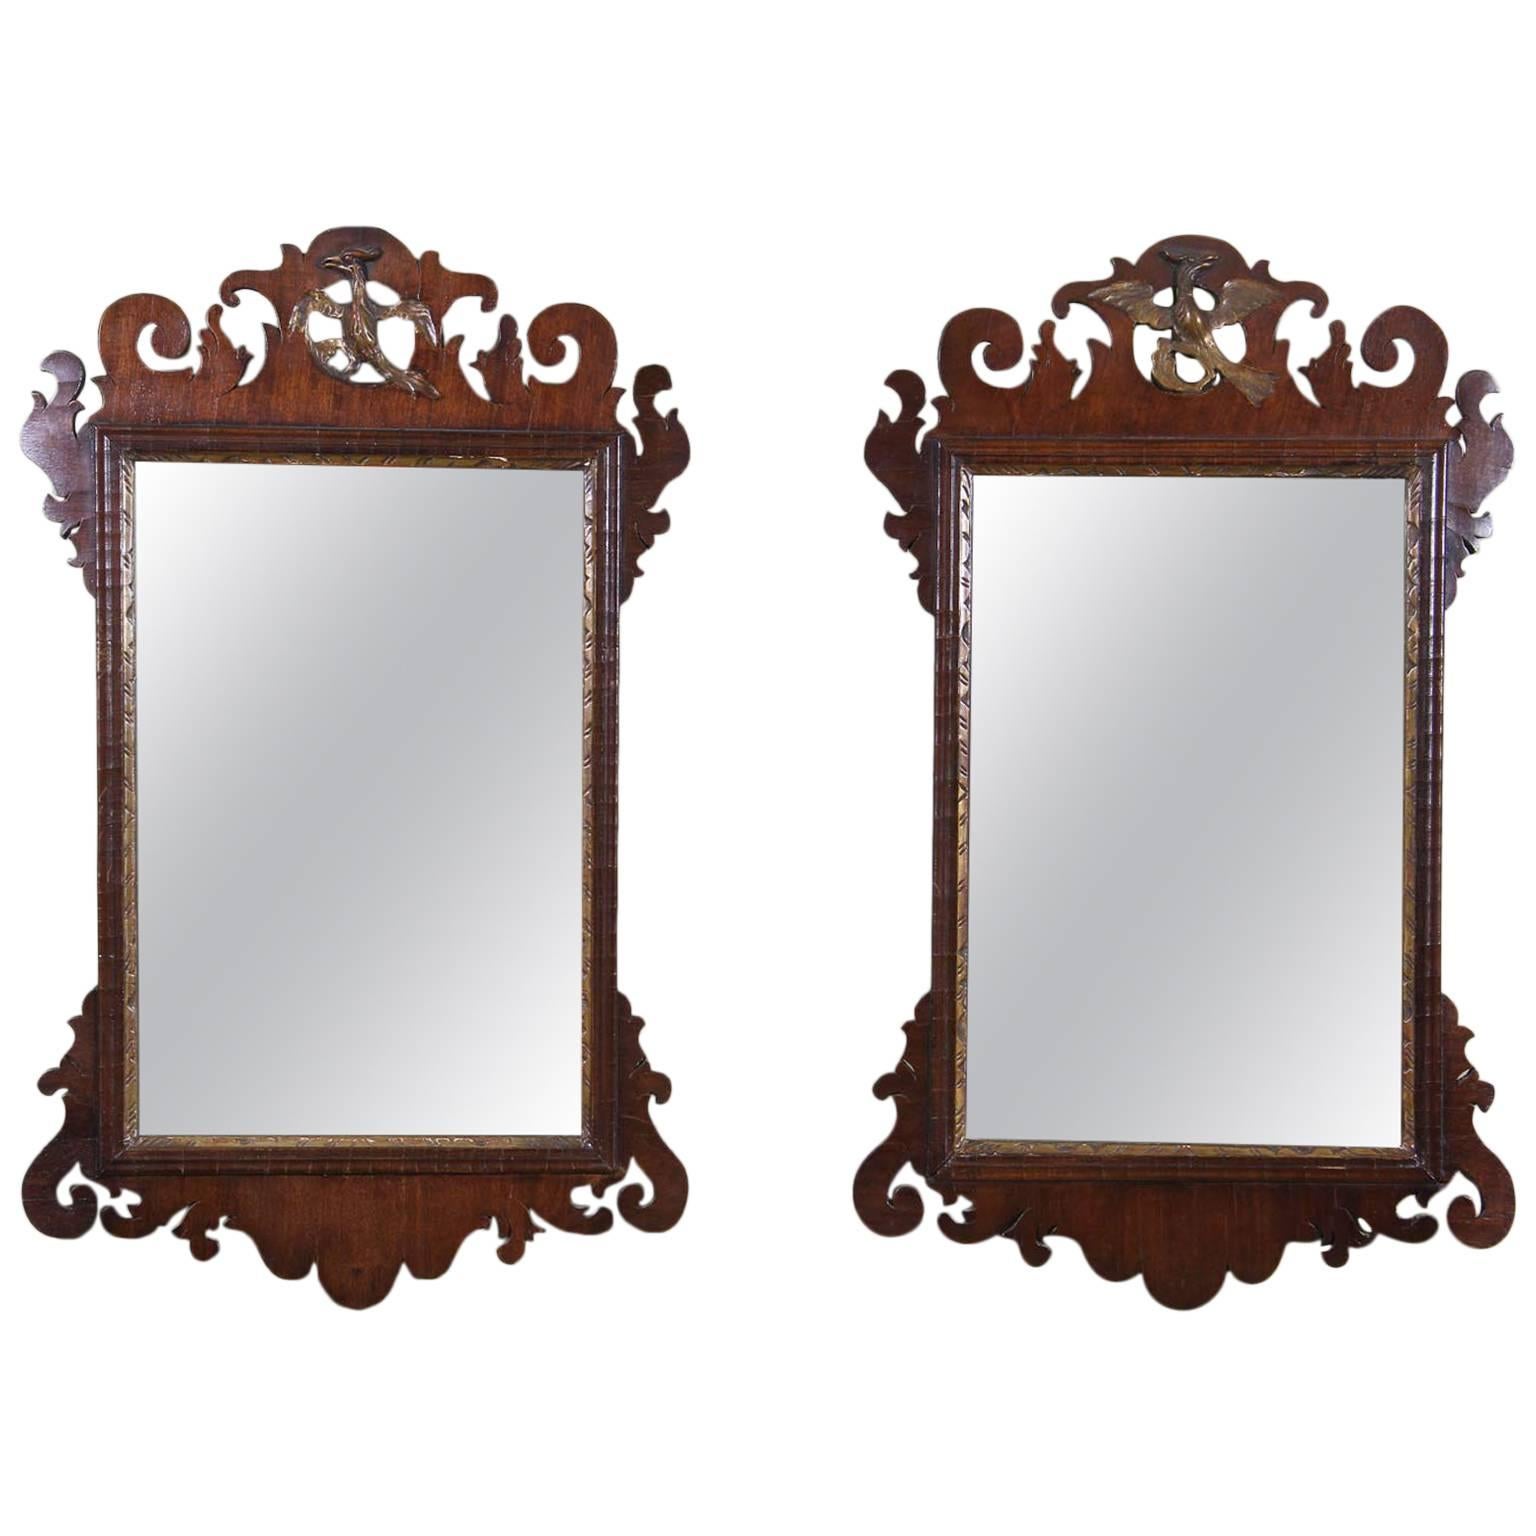 Pair of Chippendale Mahogany and Giltwood Mirrors